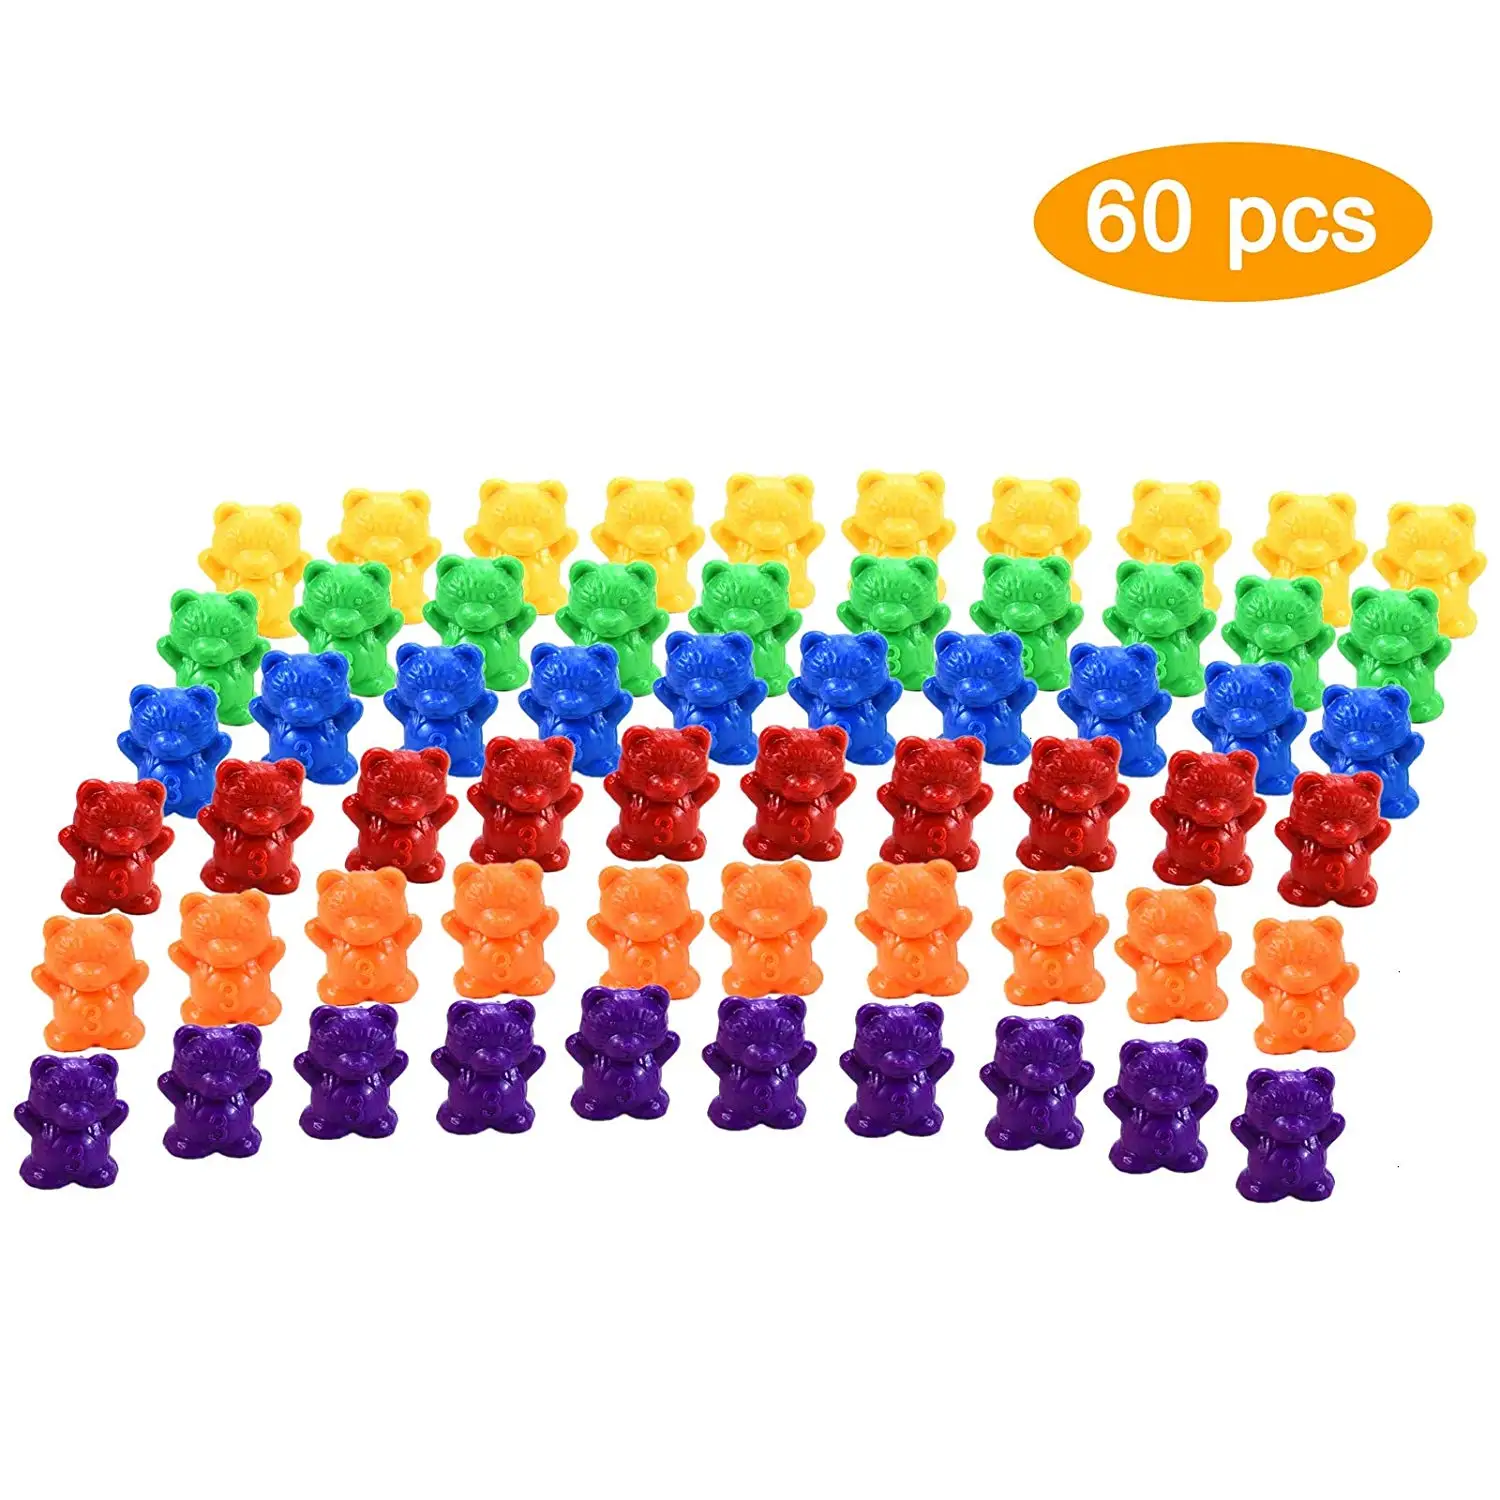 Colored 3g Counting Bears For Toddlers,60 Pcs Color Sorting Bears For